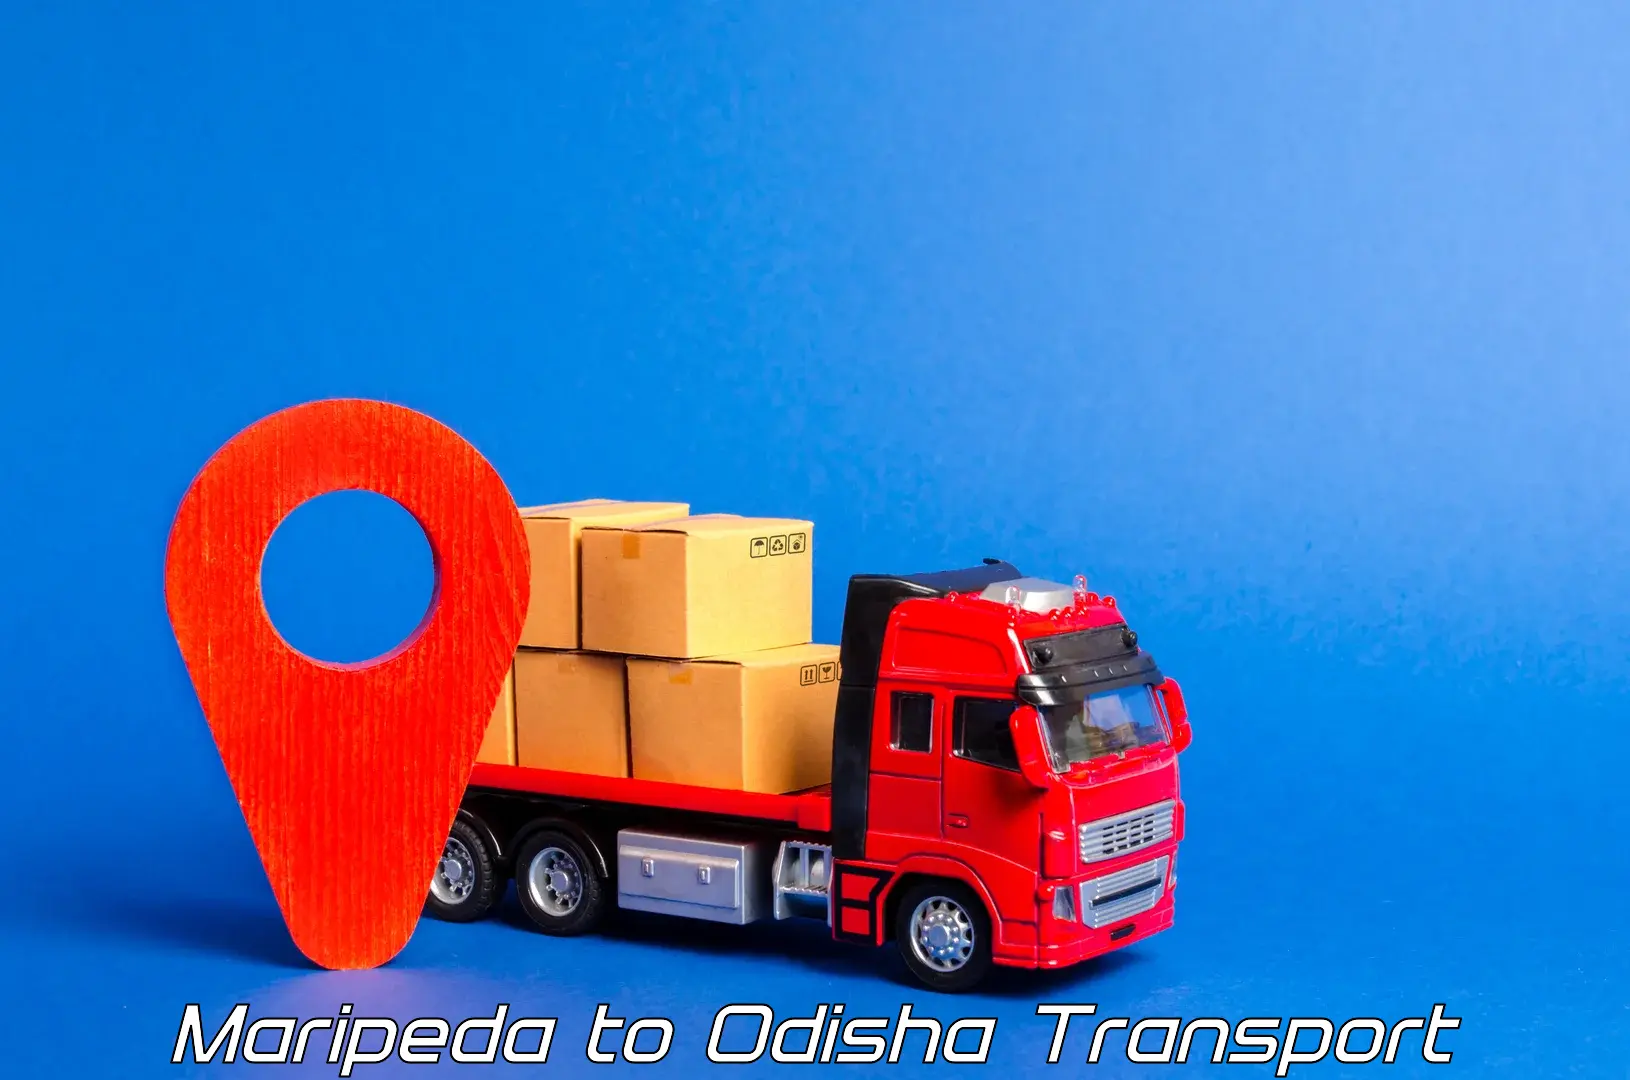 Daily transport service in Maripeda to Gumadera